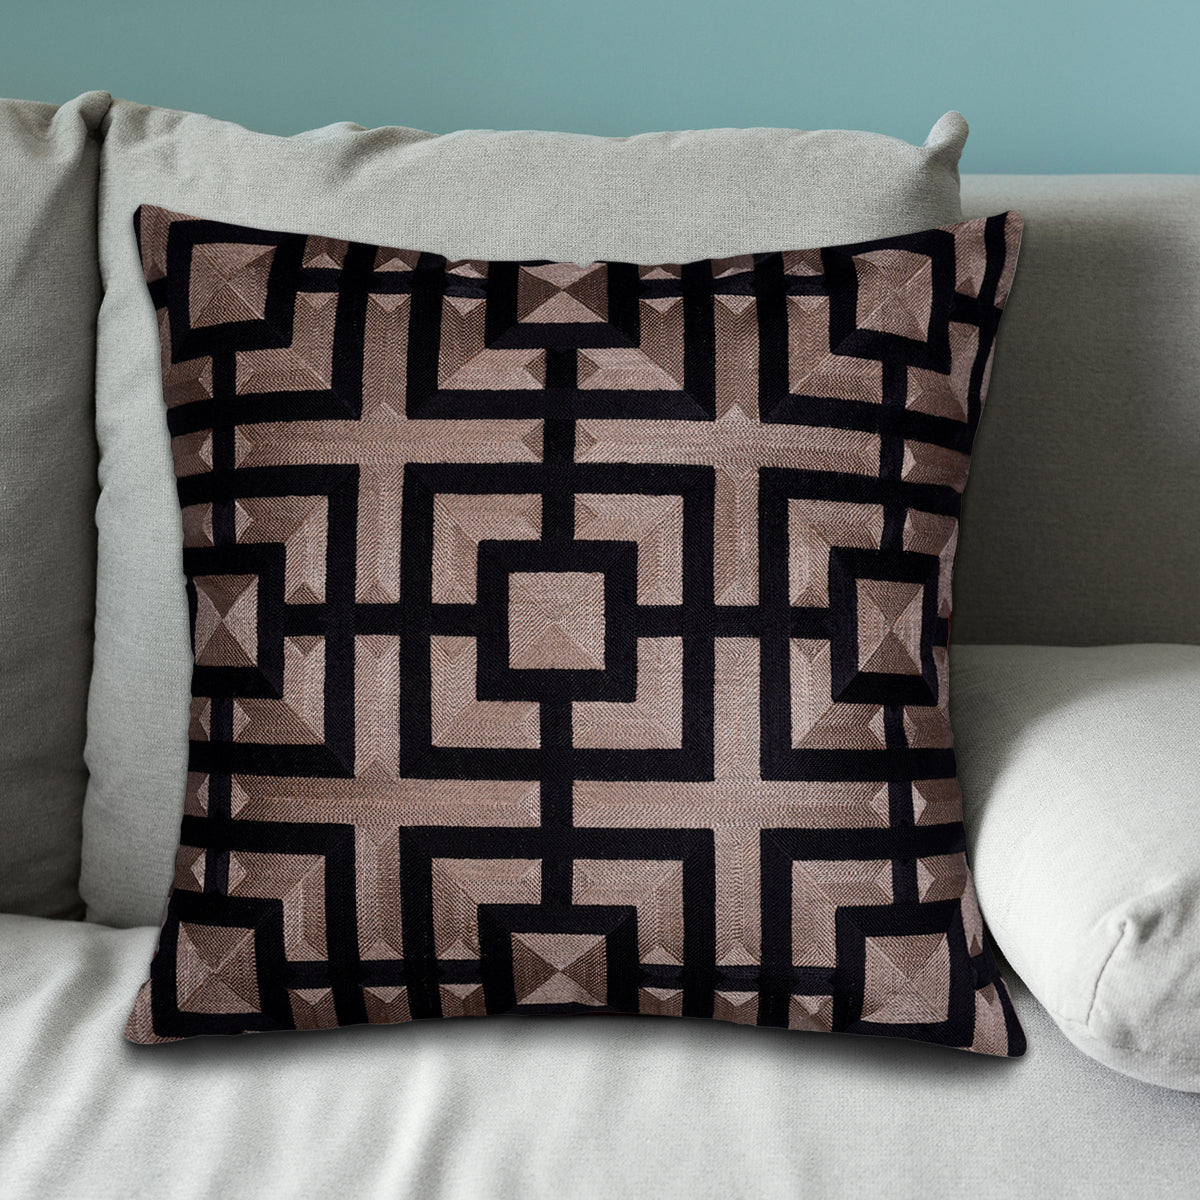 Brown Black Throw Pillow Covers - 20 x 20 inches - Decozen